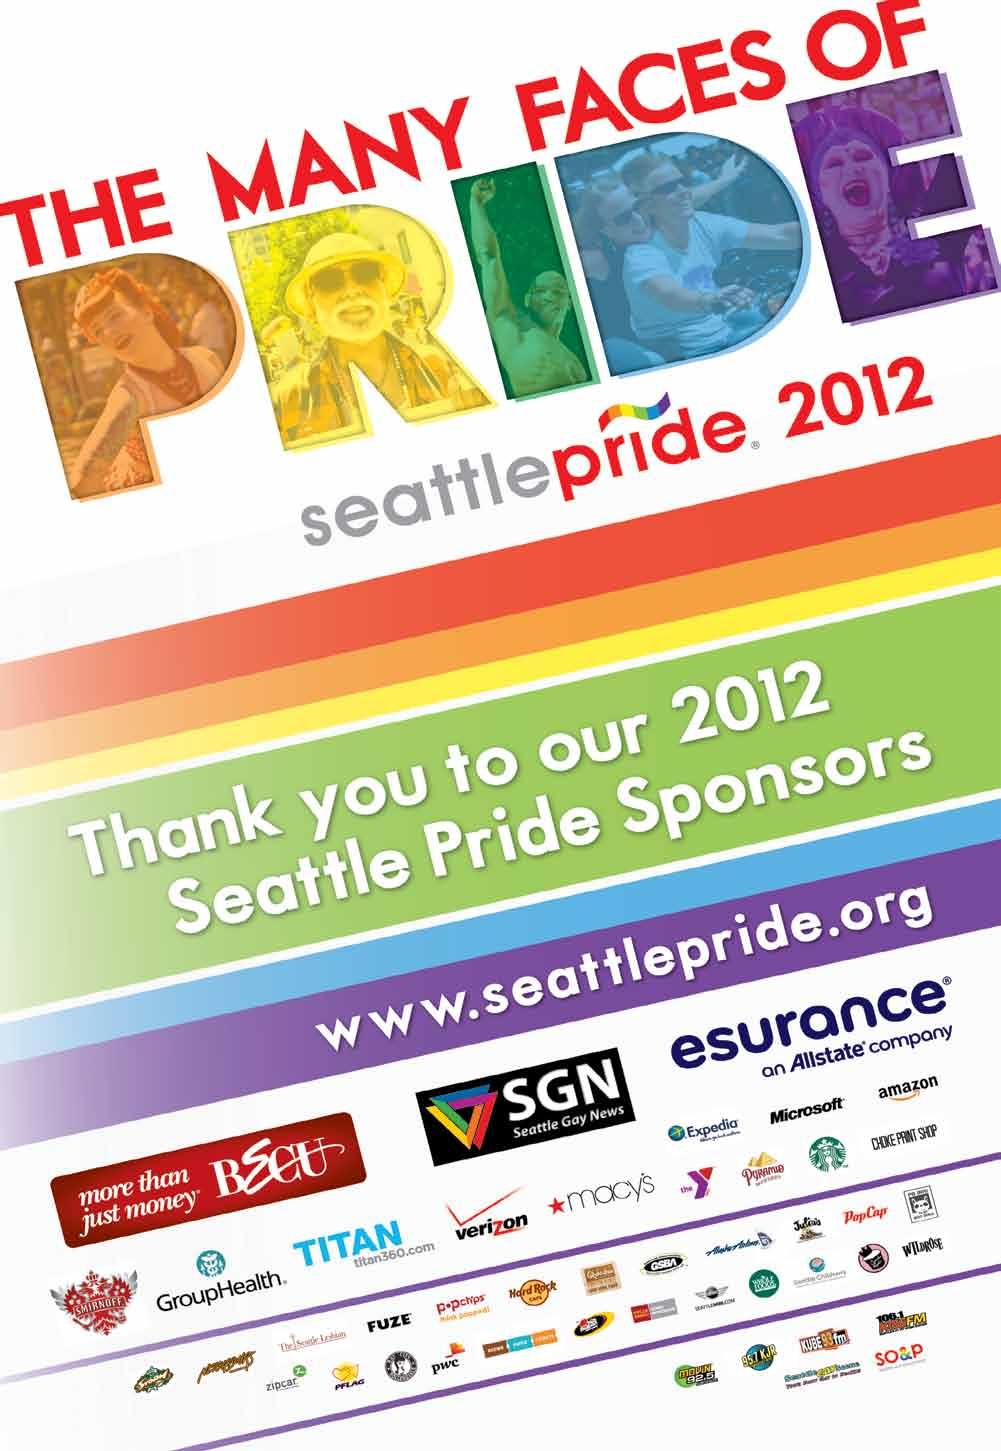 18 Seattle Gay News To see all of our Pride